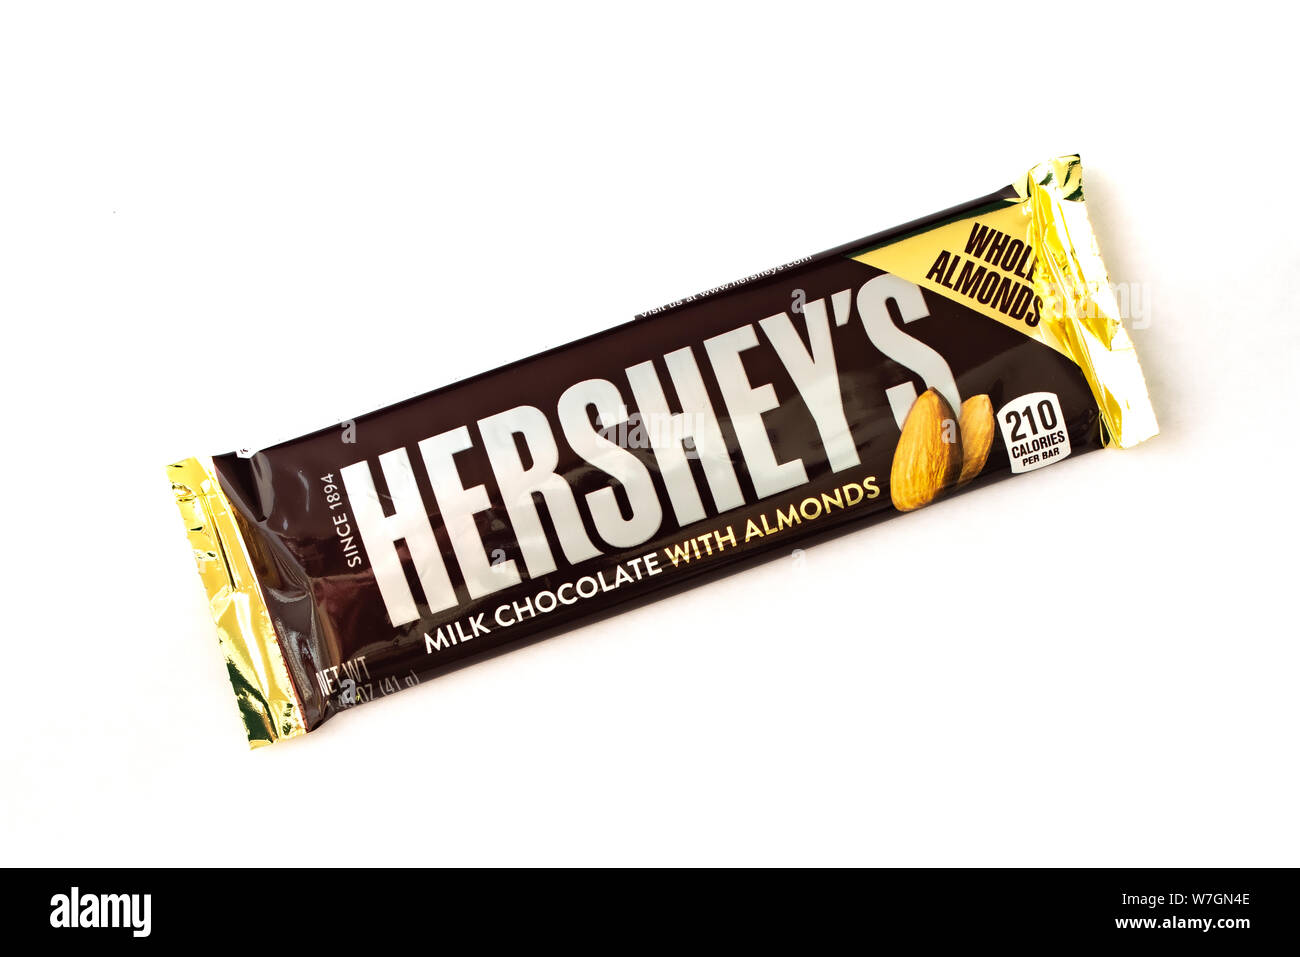 A Hershey's milk chocolate with almonds candy bar isolated on white Stock Photo